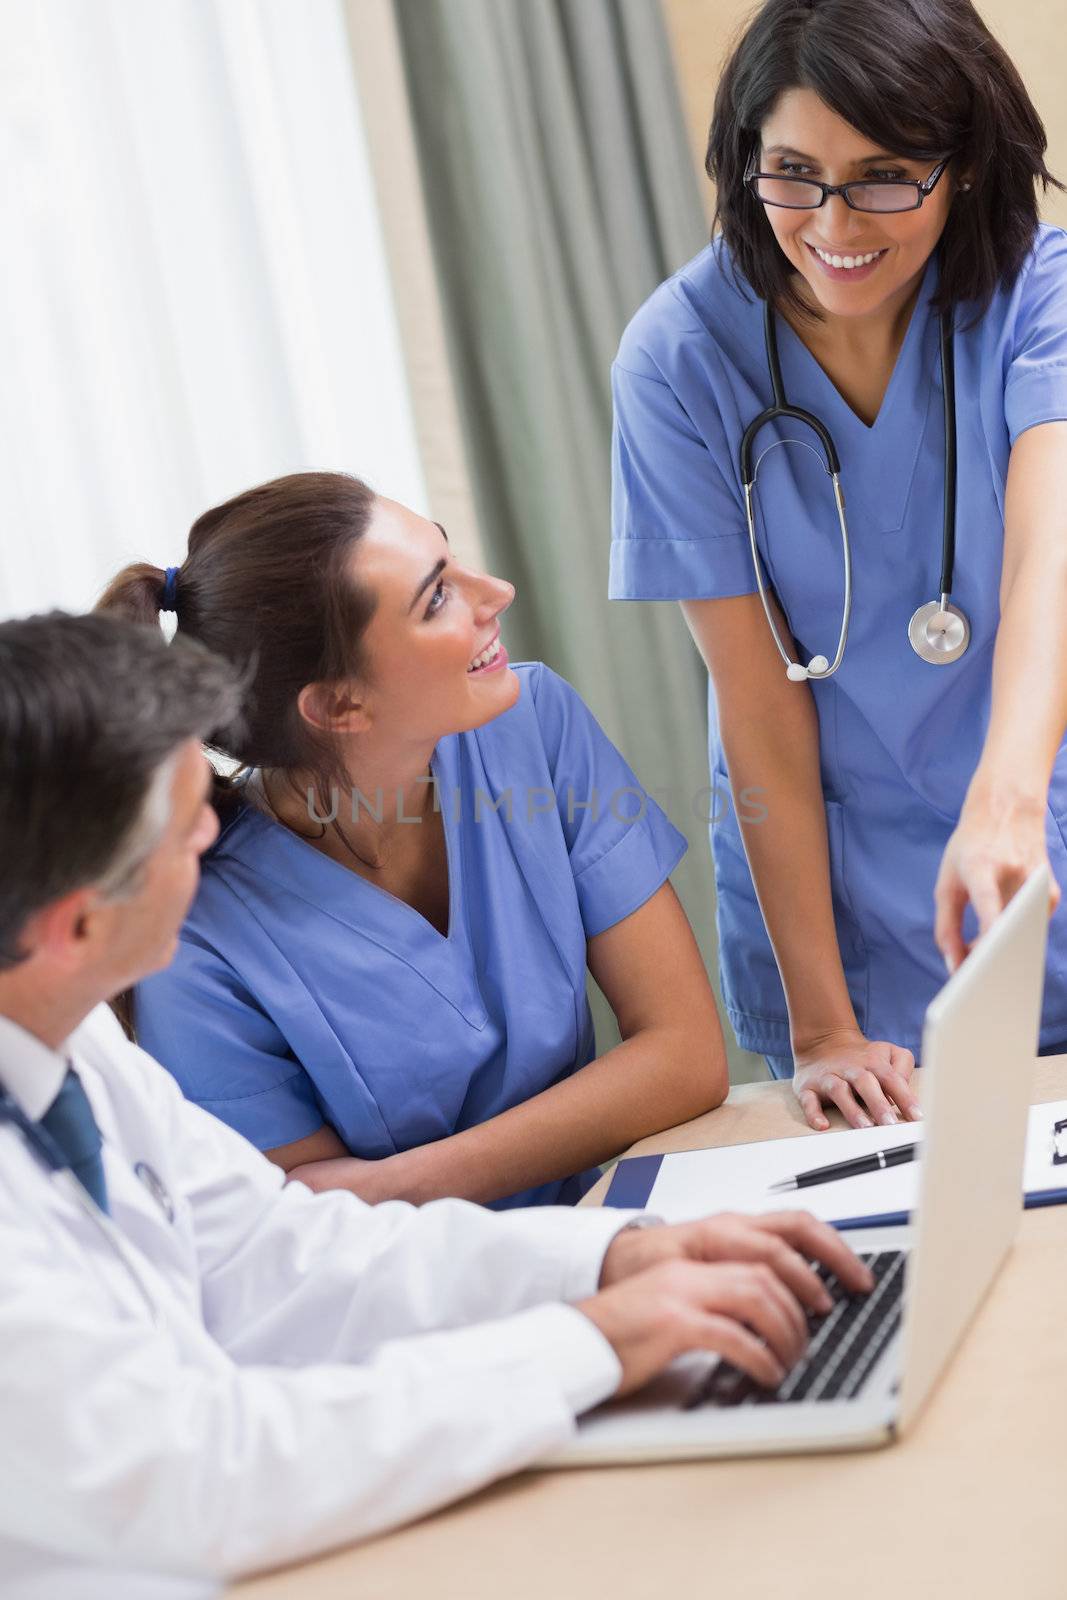 Nurse pointing to something on laptop in meeting with doctor and other nurse